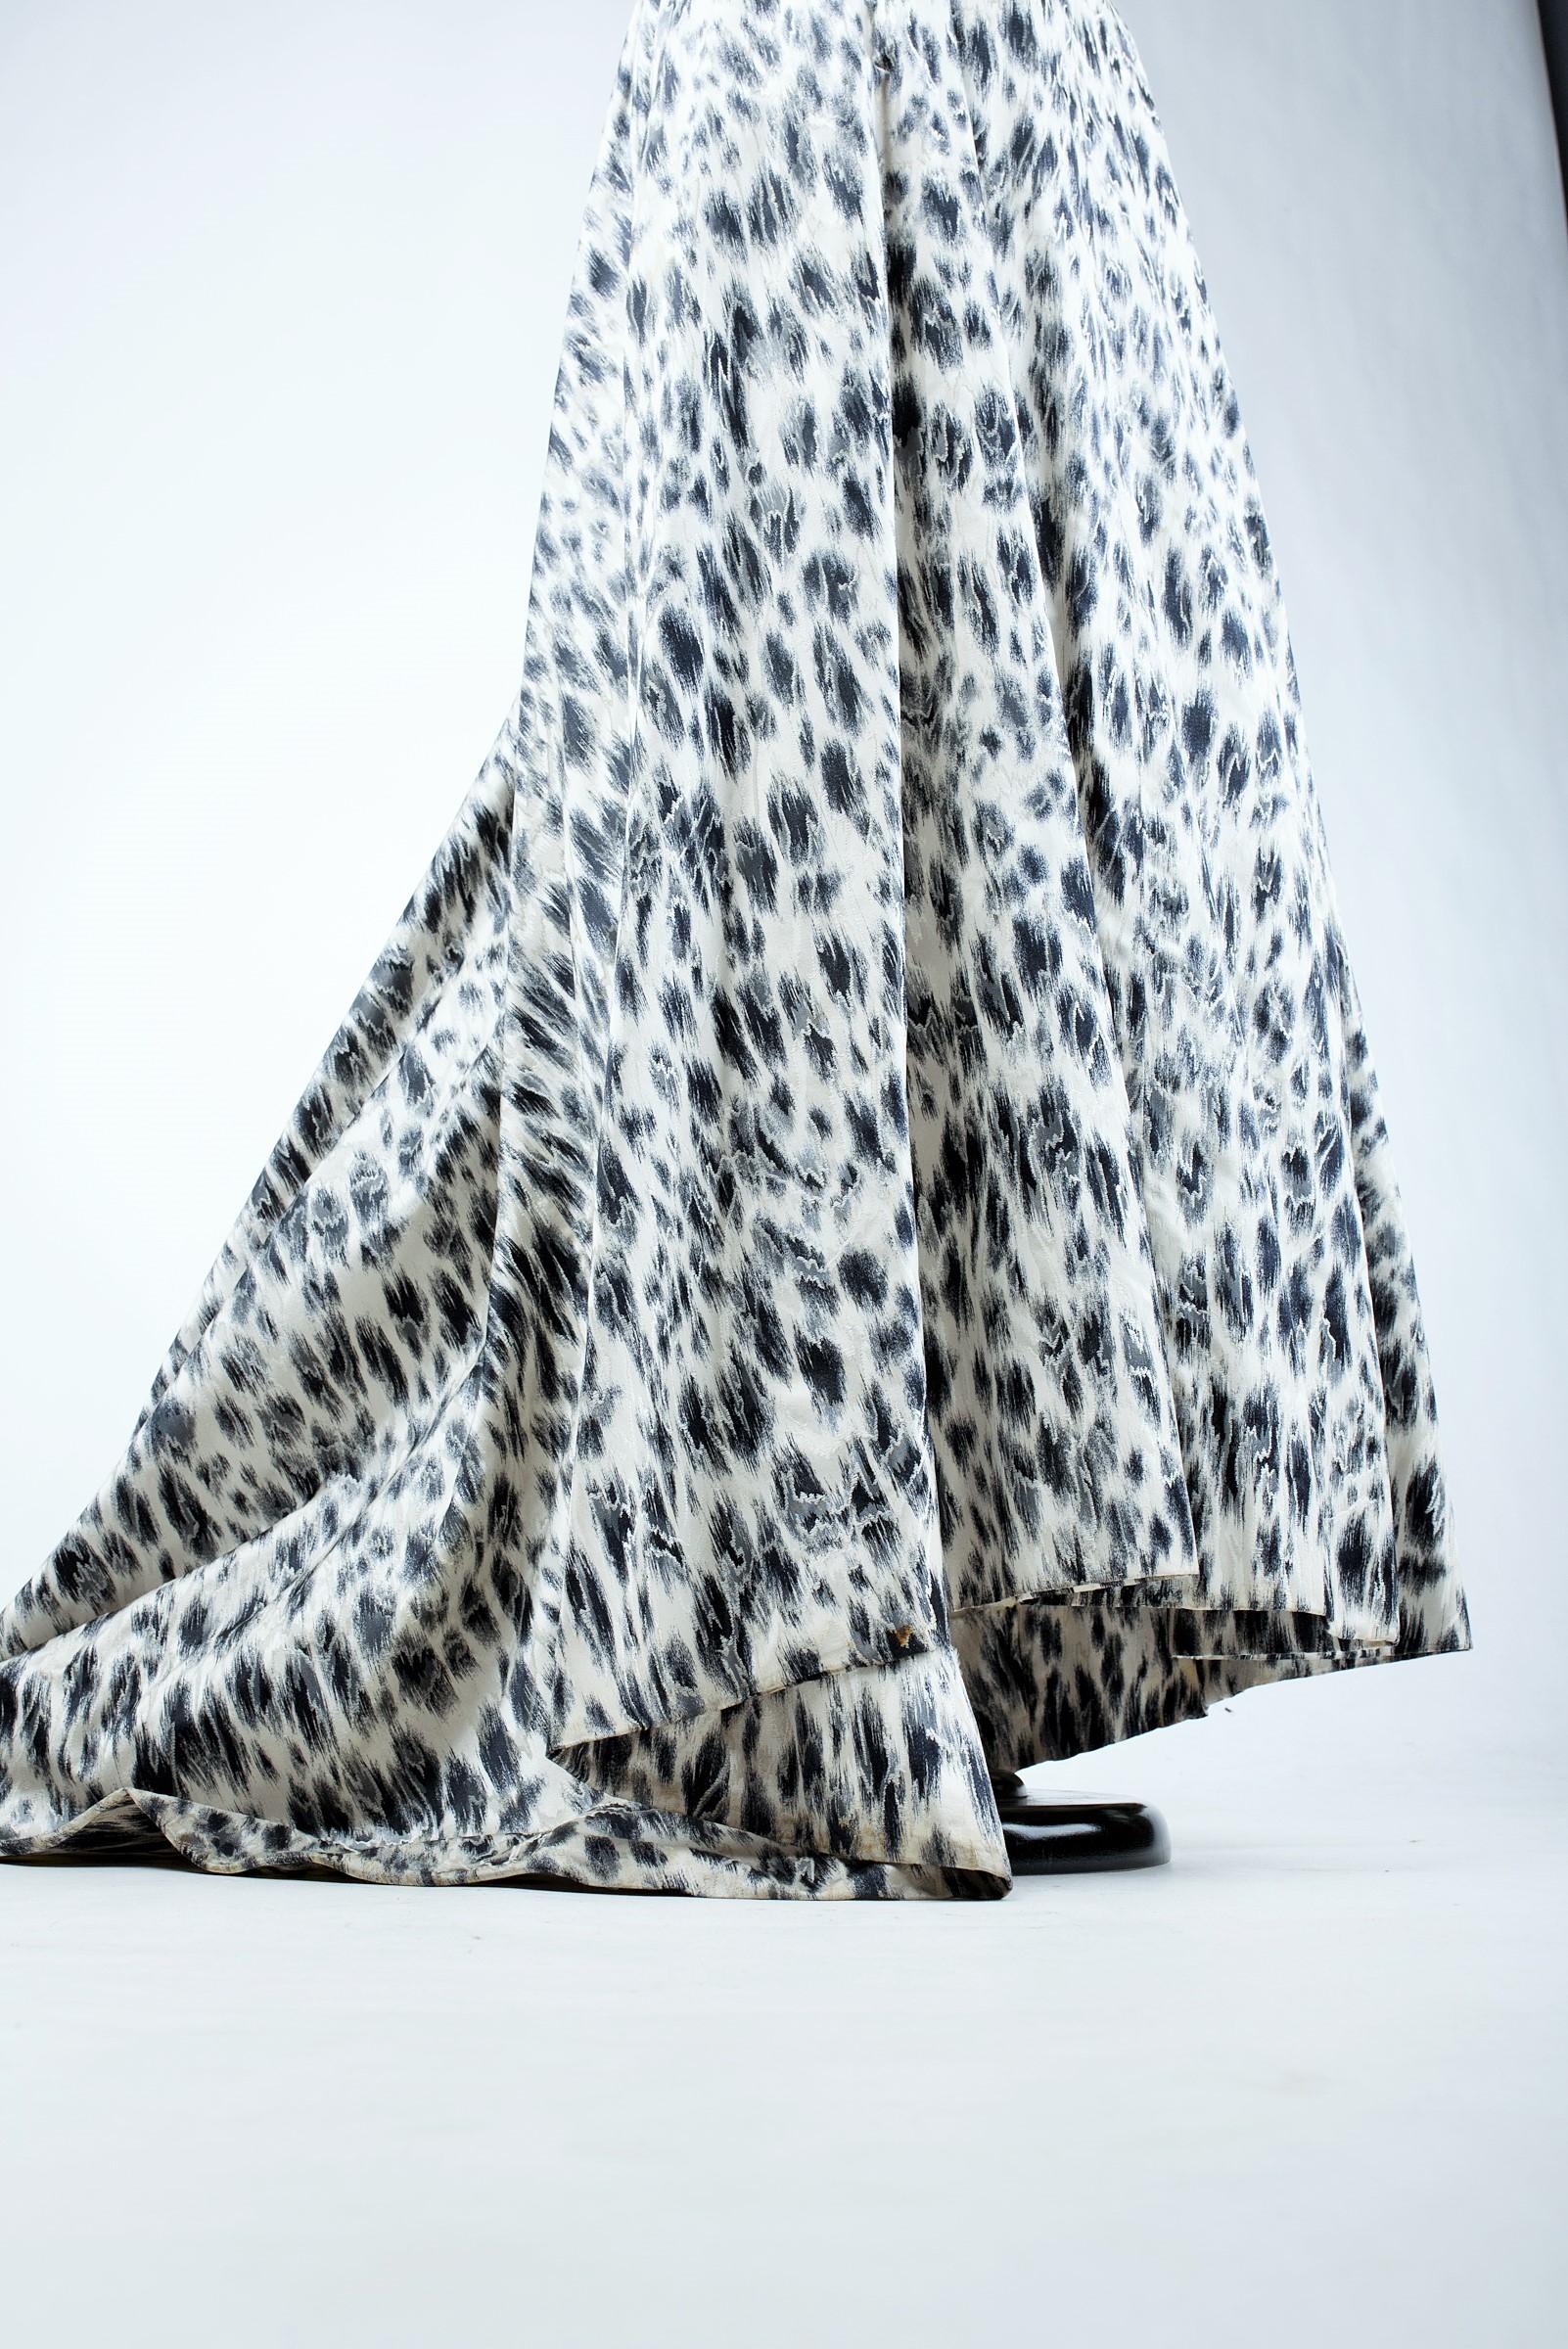 Leopard printed silk Evening Dress by Jacques Fath Haute Couture Circa 1955-1960 For Sale 12